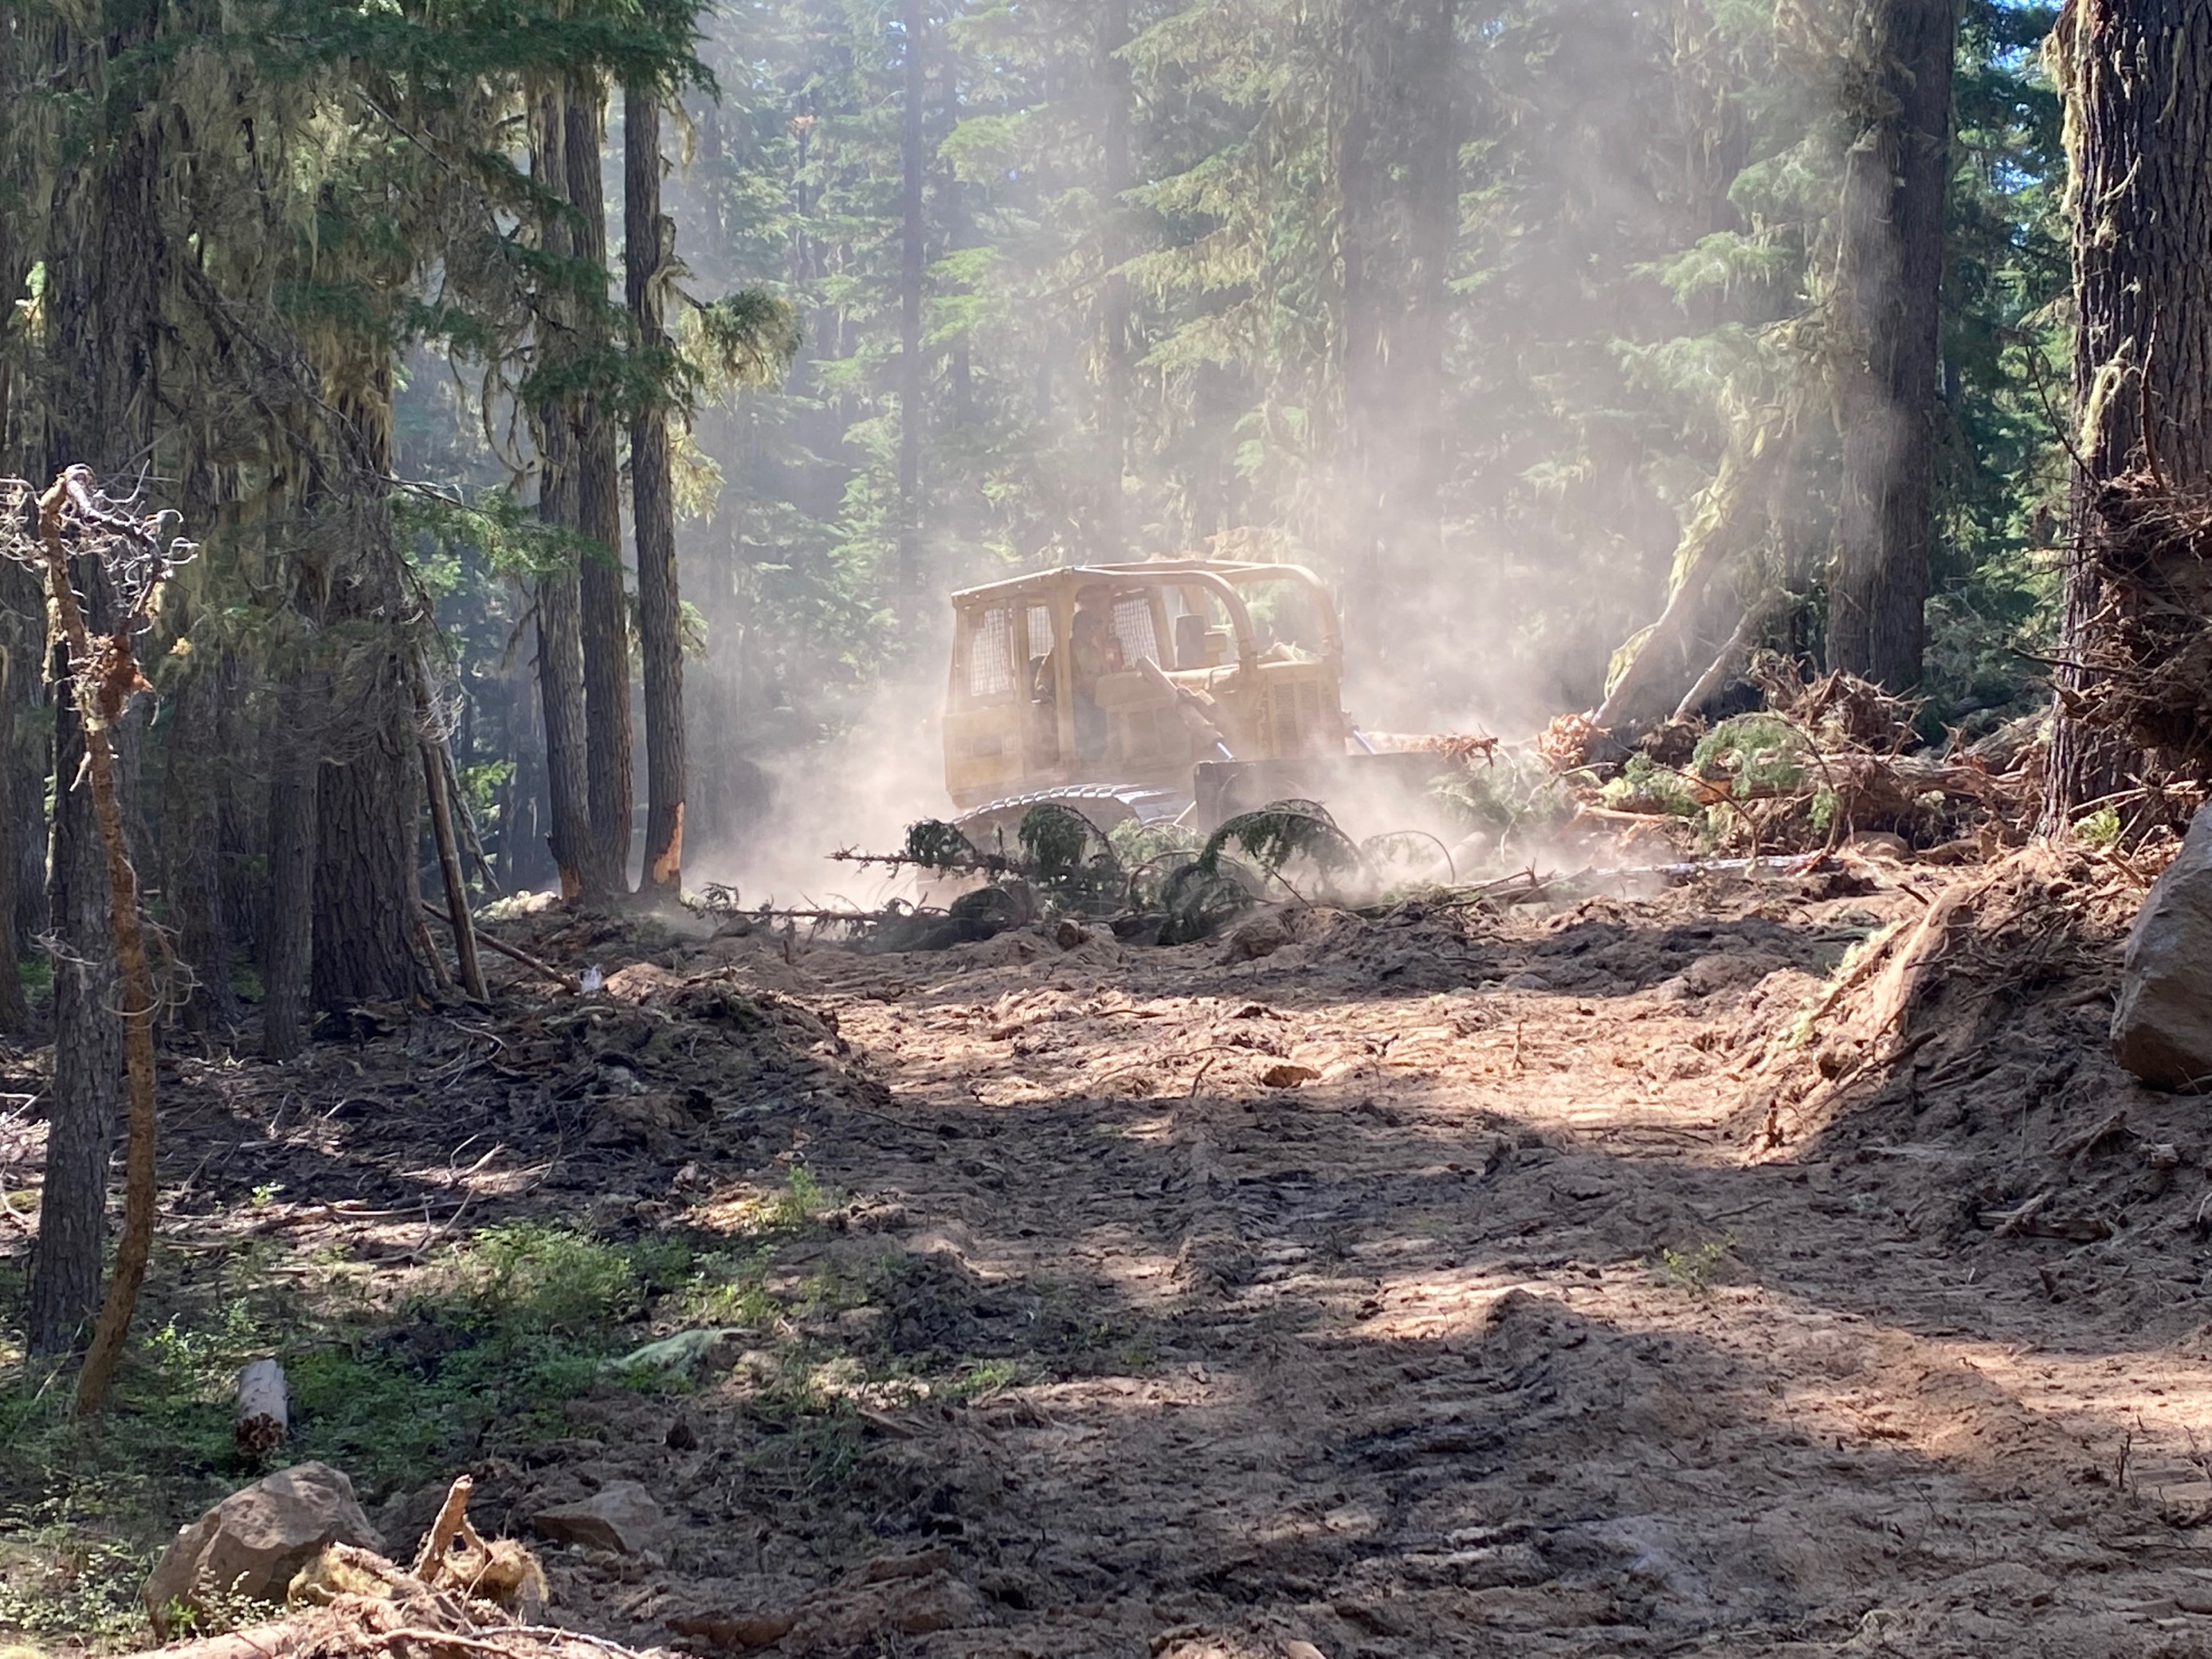 Bulldozer in the forest creating a break in the vegetation during a fire.